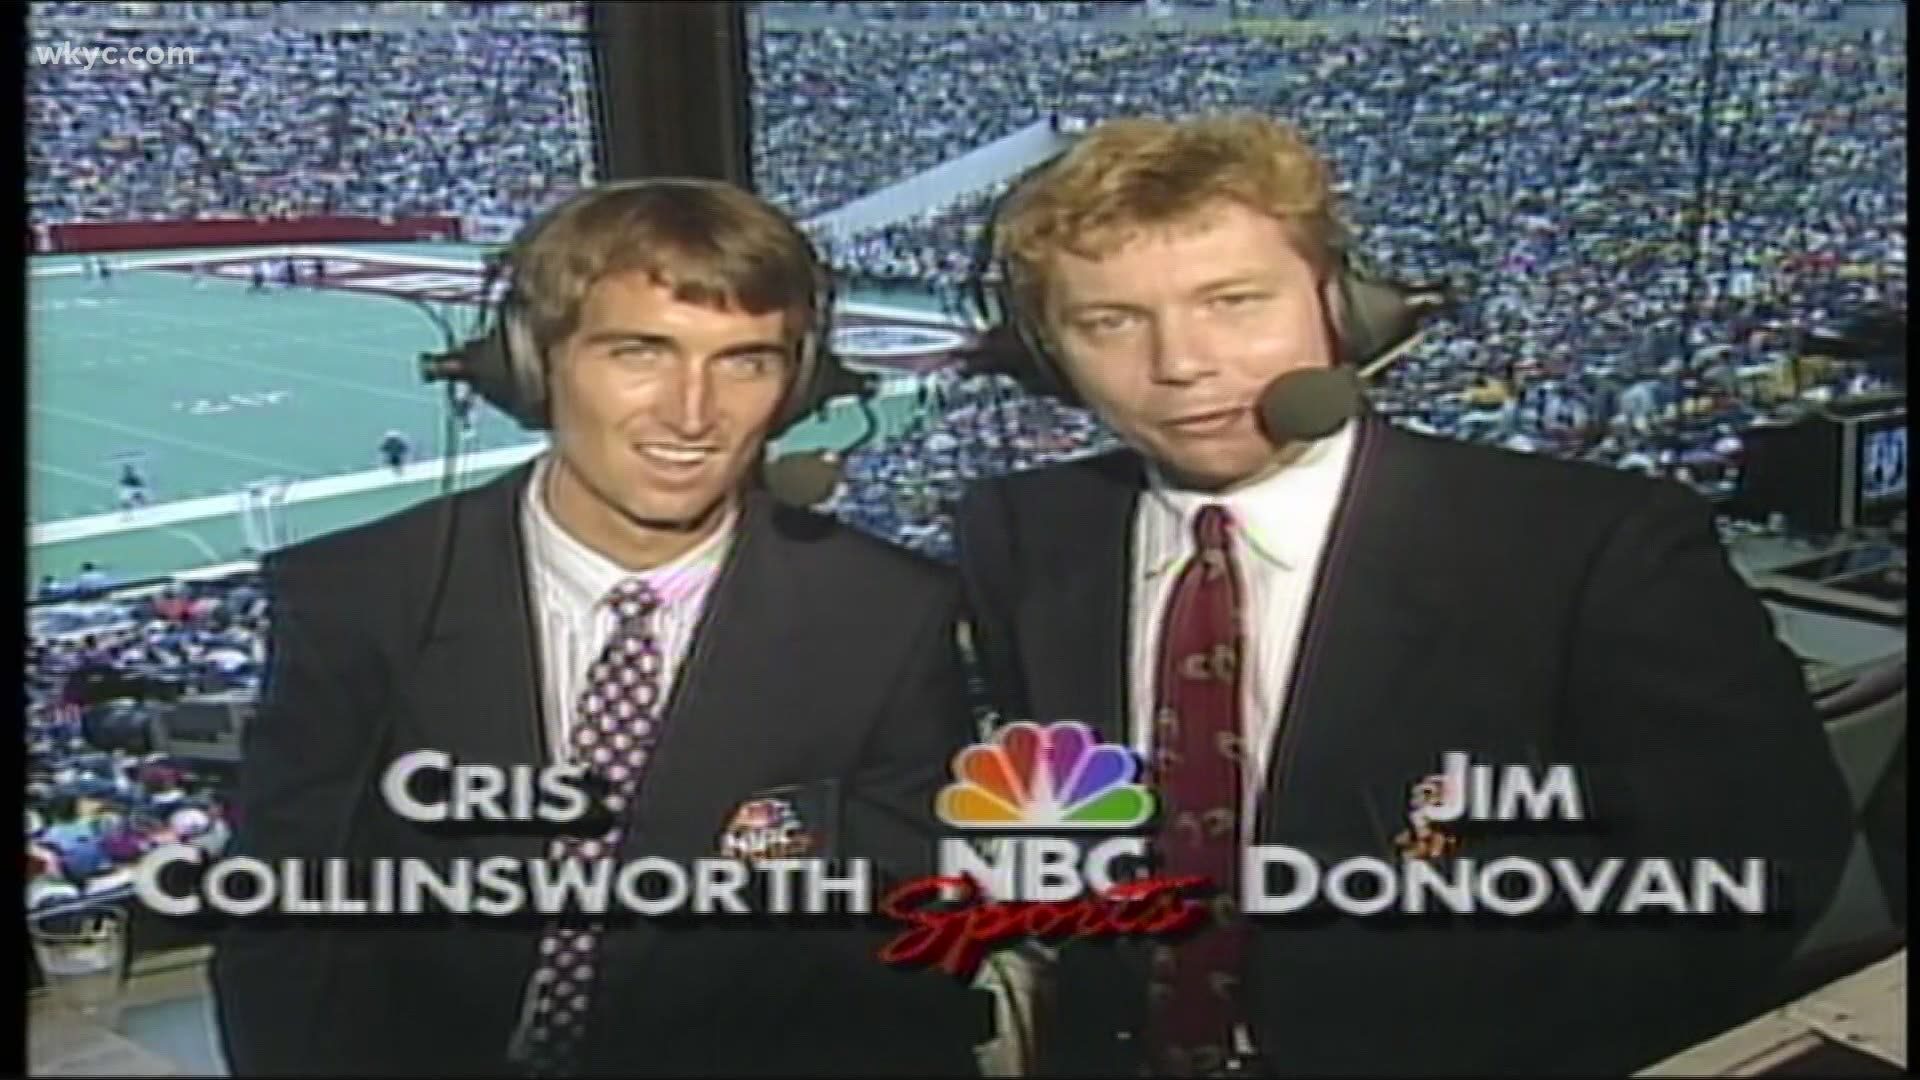 Collinsworth got his start at NBC back in 1990, and Jimmy was his partner. The two spoke to each other on 3News' 'What Matters Most.'